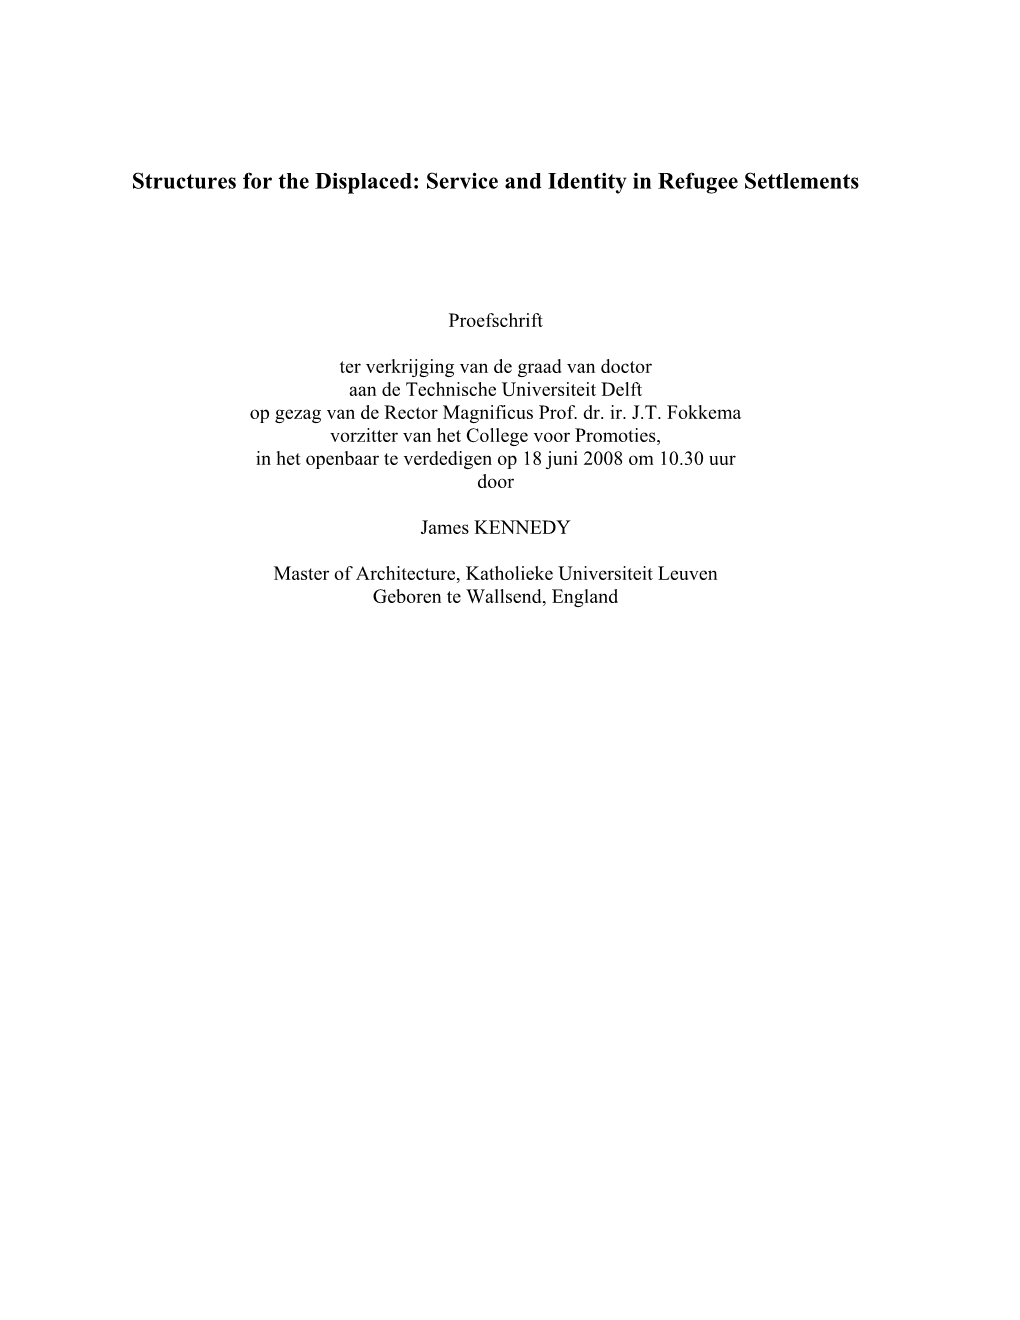 Service and Identity in Refugee Settlements